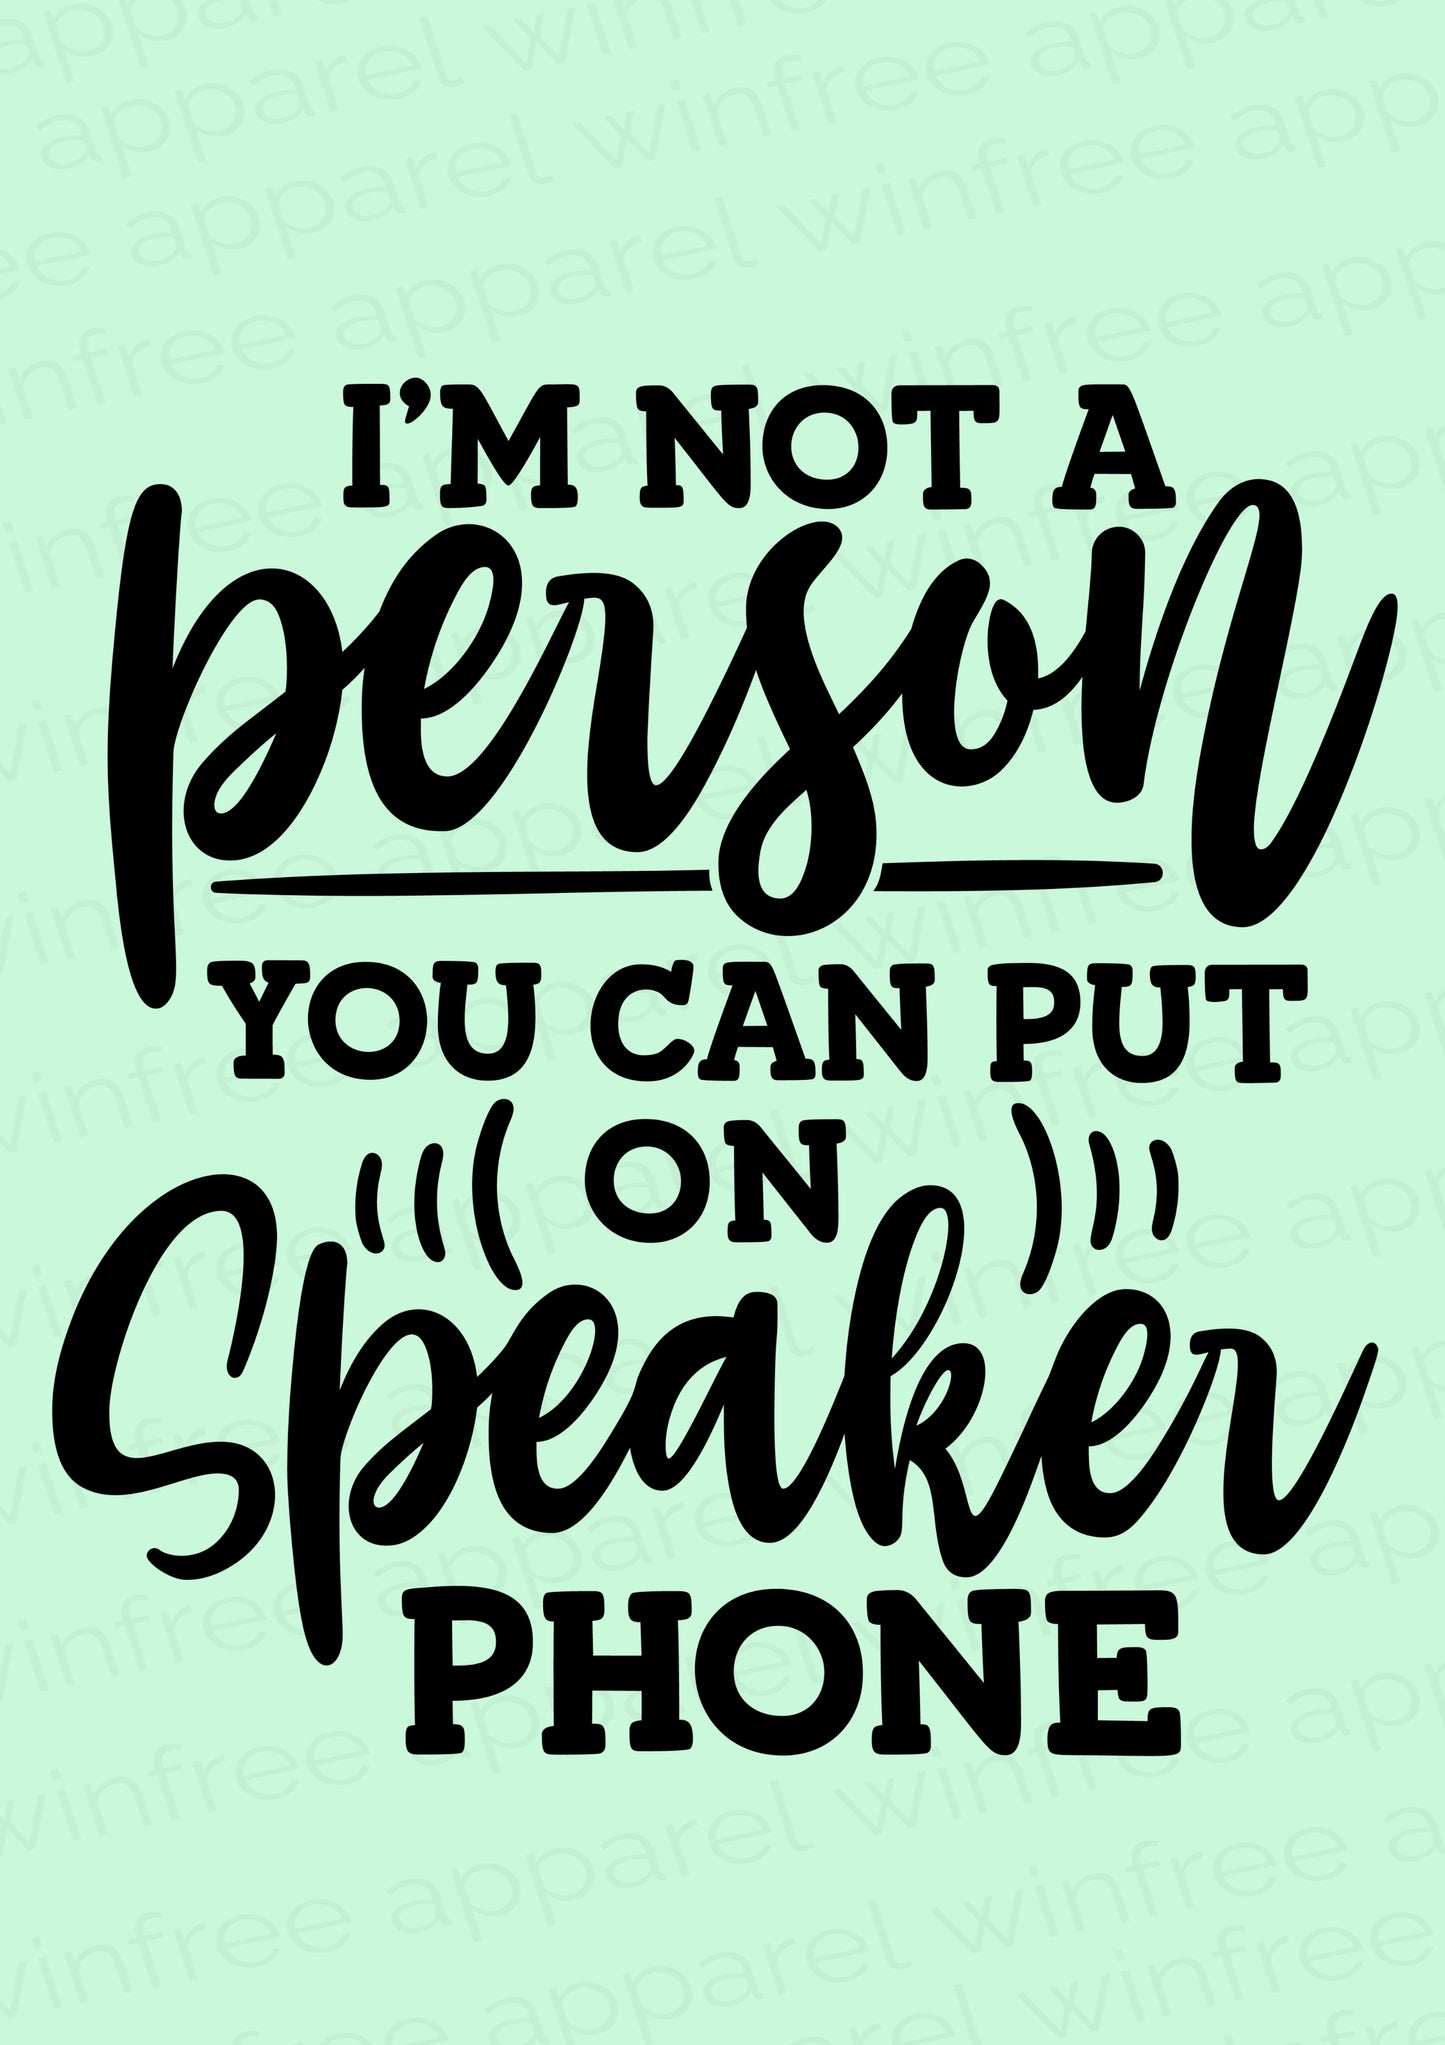 I'm Not a Person You Put on Speaker Phone